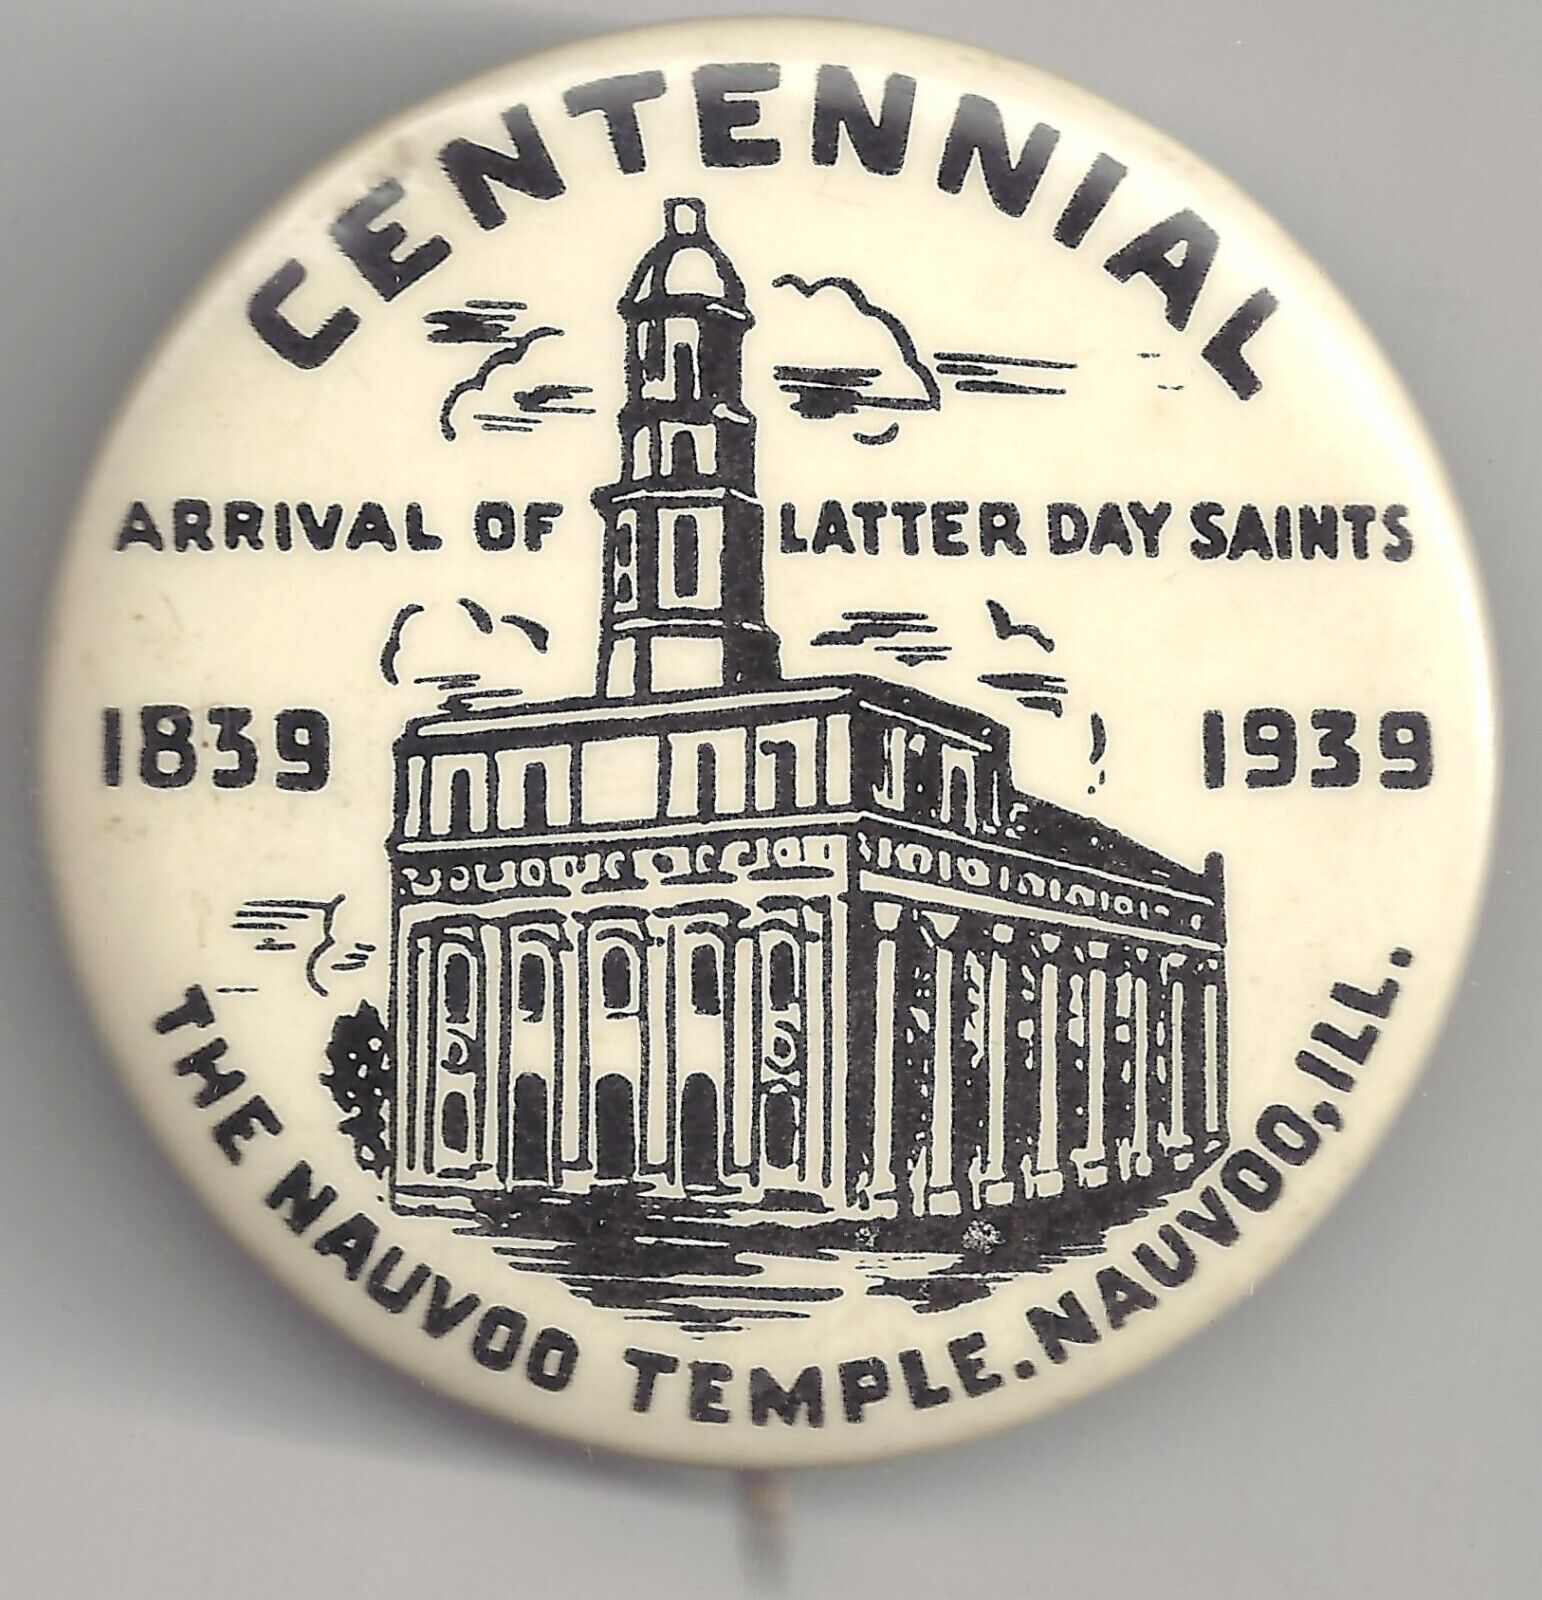 1839 - 1939 Centennial Pin NAUVOO TEMPLE IL Pinback Arrival of LATTER DAY Saints